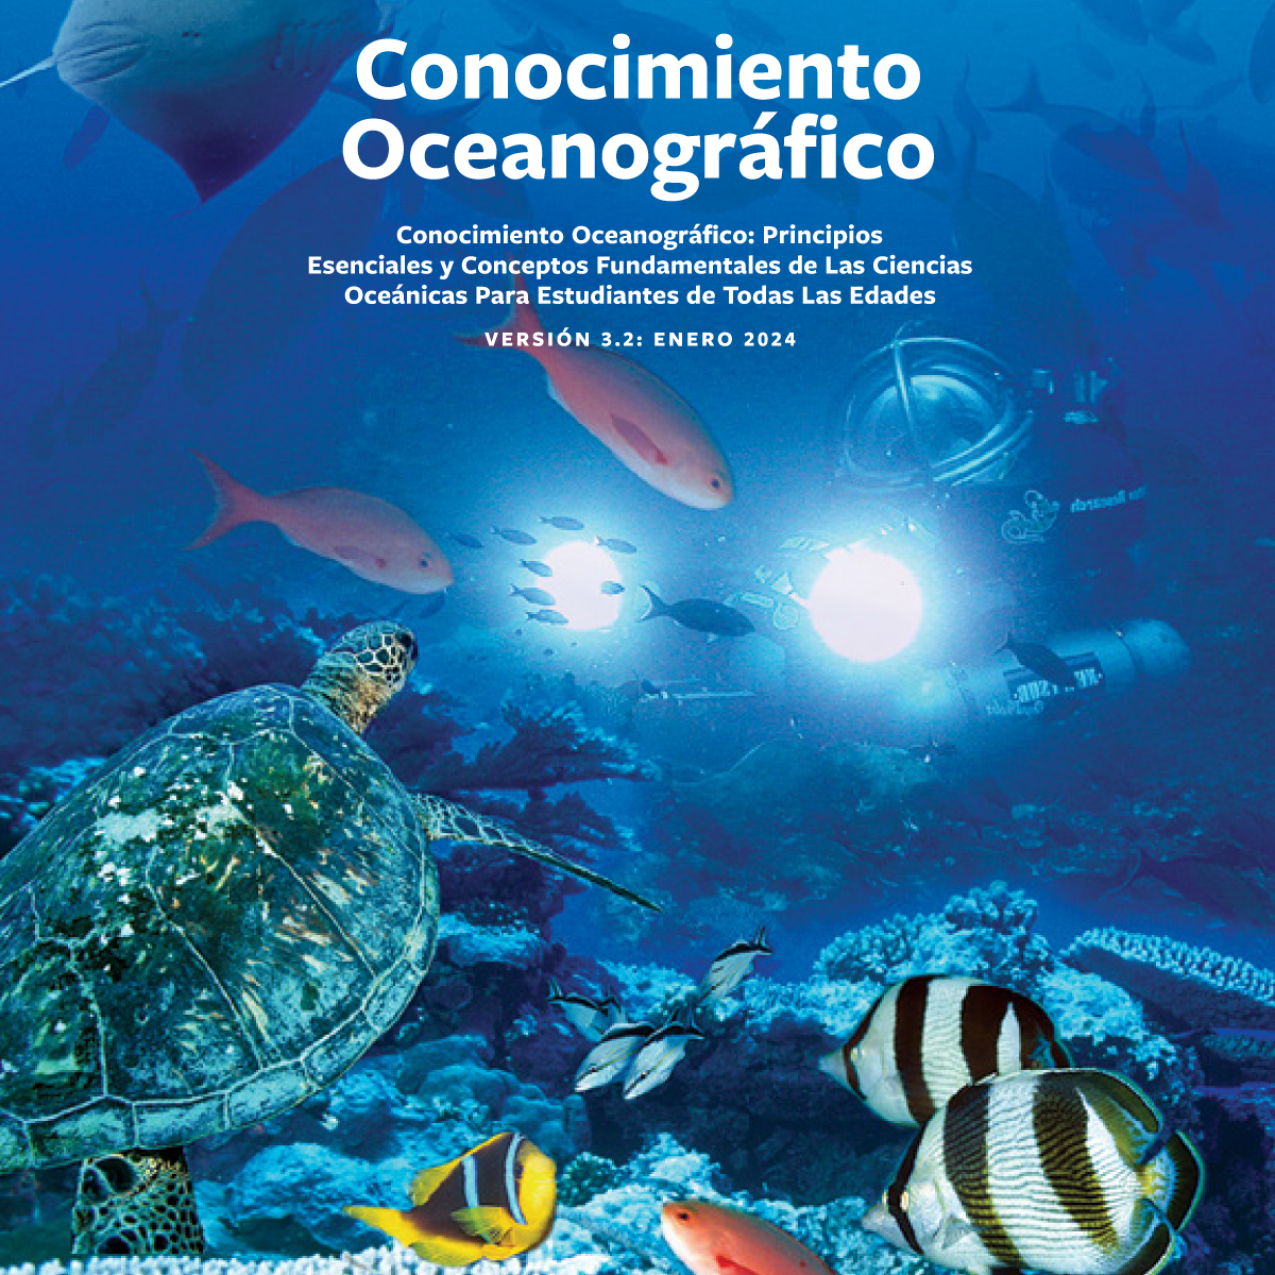 The image of the cover of the guide includes the title in white text “Conocimiento Oceanográfico: Principios Esenciales y Conceptos Fundamentales de Las Ciencias Oceánicas Para Estudiantes de Todas Las Edades”.  The background for the text is a photographic compilation with the view below the waterline. We see blue ocean water teeming with marine life such as many different types of fishes, sea turtles, and coral reefs. A small submersible shines its lights on these marine animals.